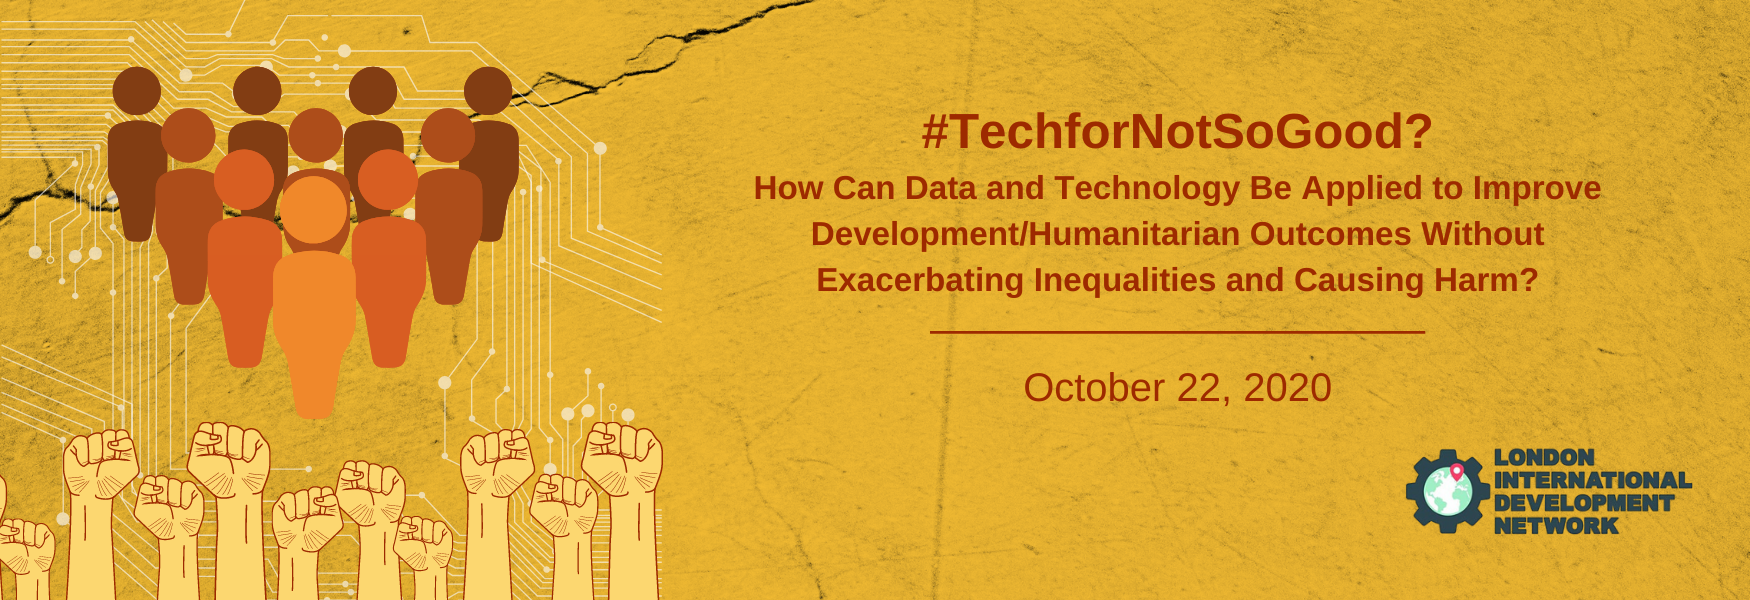 #TechforNotSoGood? How Can Data and Technology Be Applied to Improve Development/Humanitarian Outcomes Without Exacerbating Inequalities and Causing Harm?